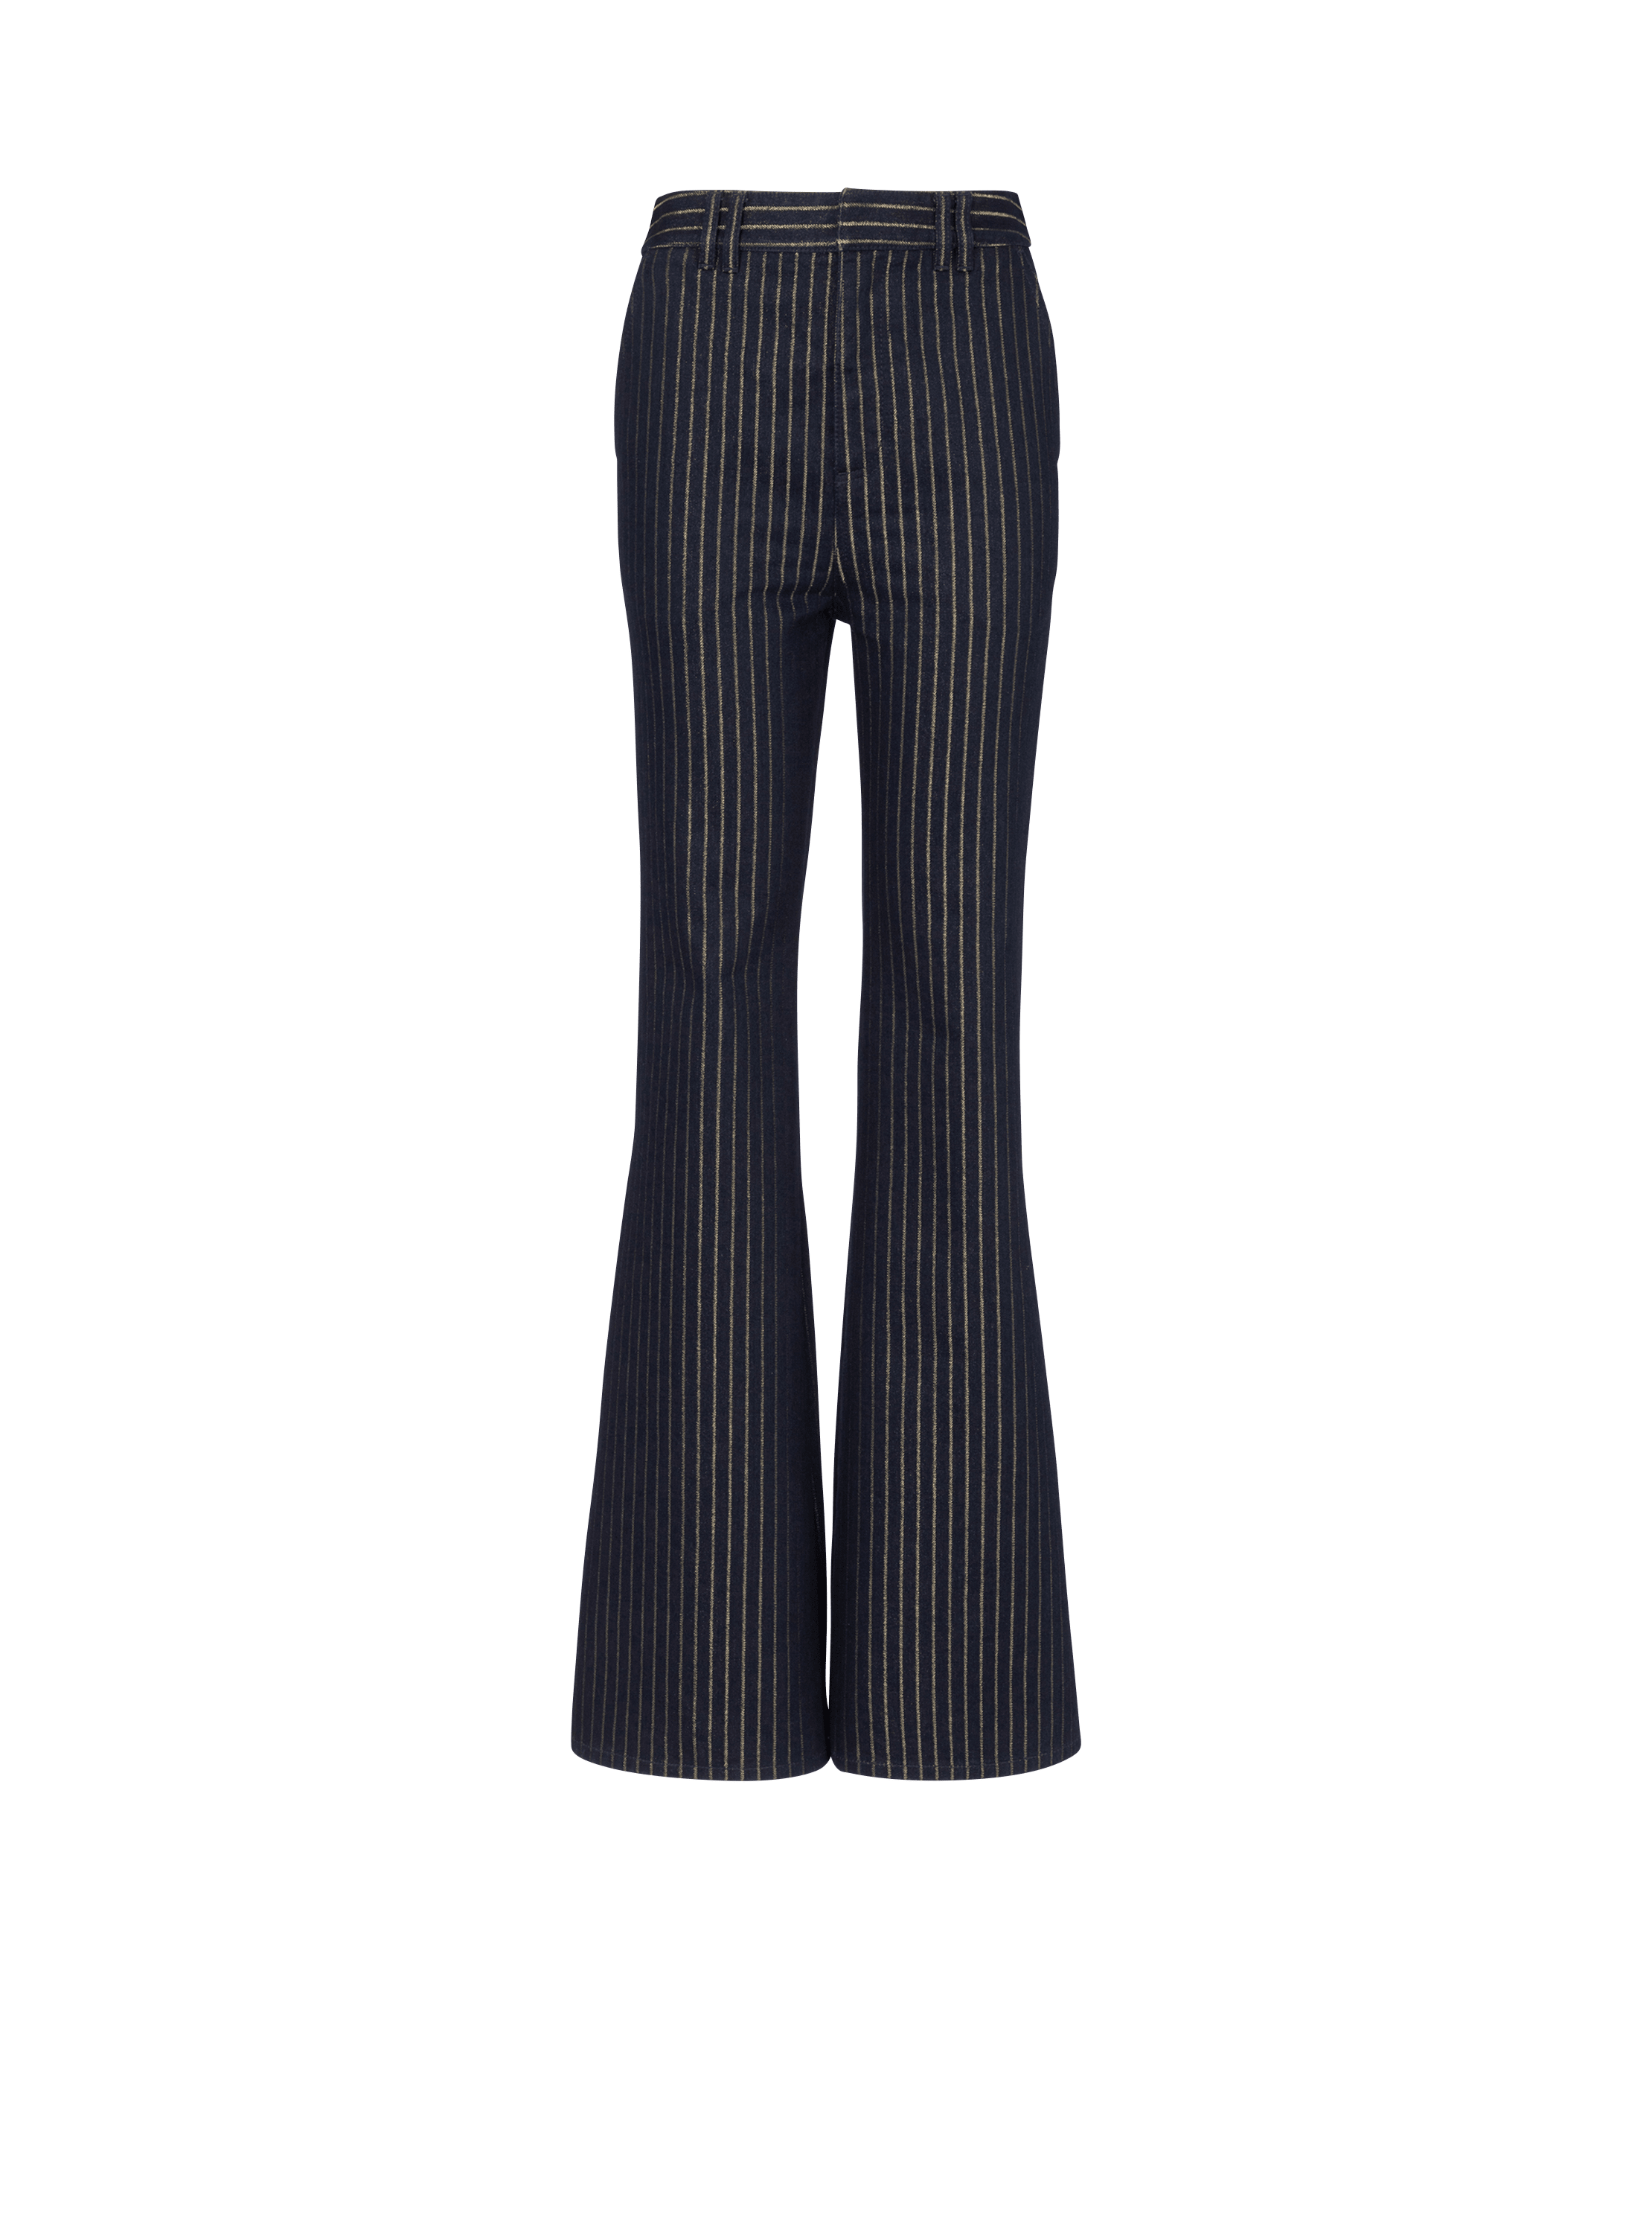 Flared jeans with lurex stripes, navy, hi-res